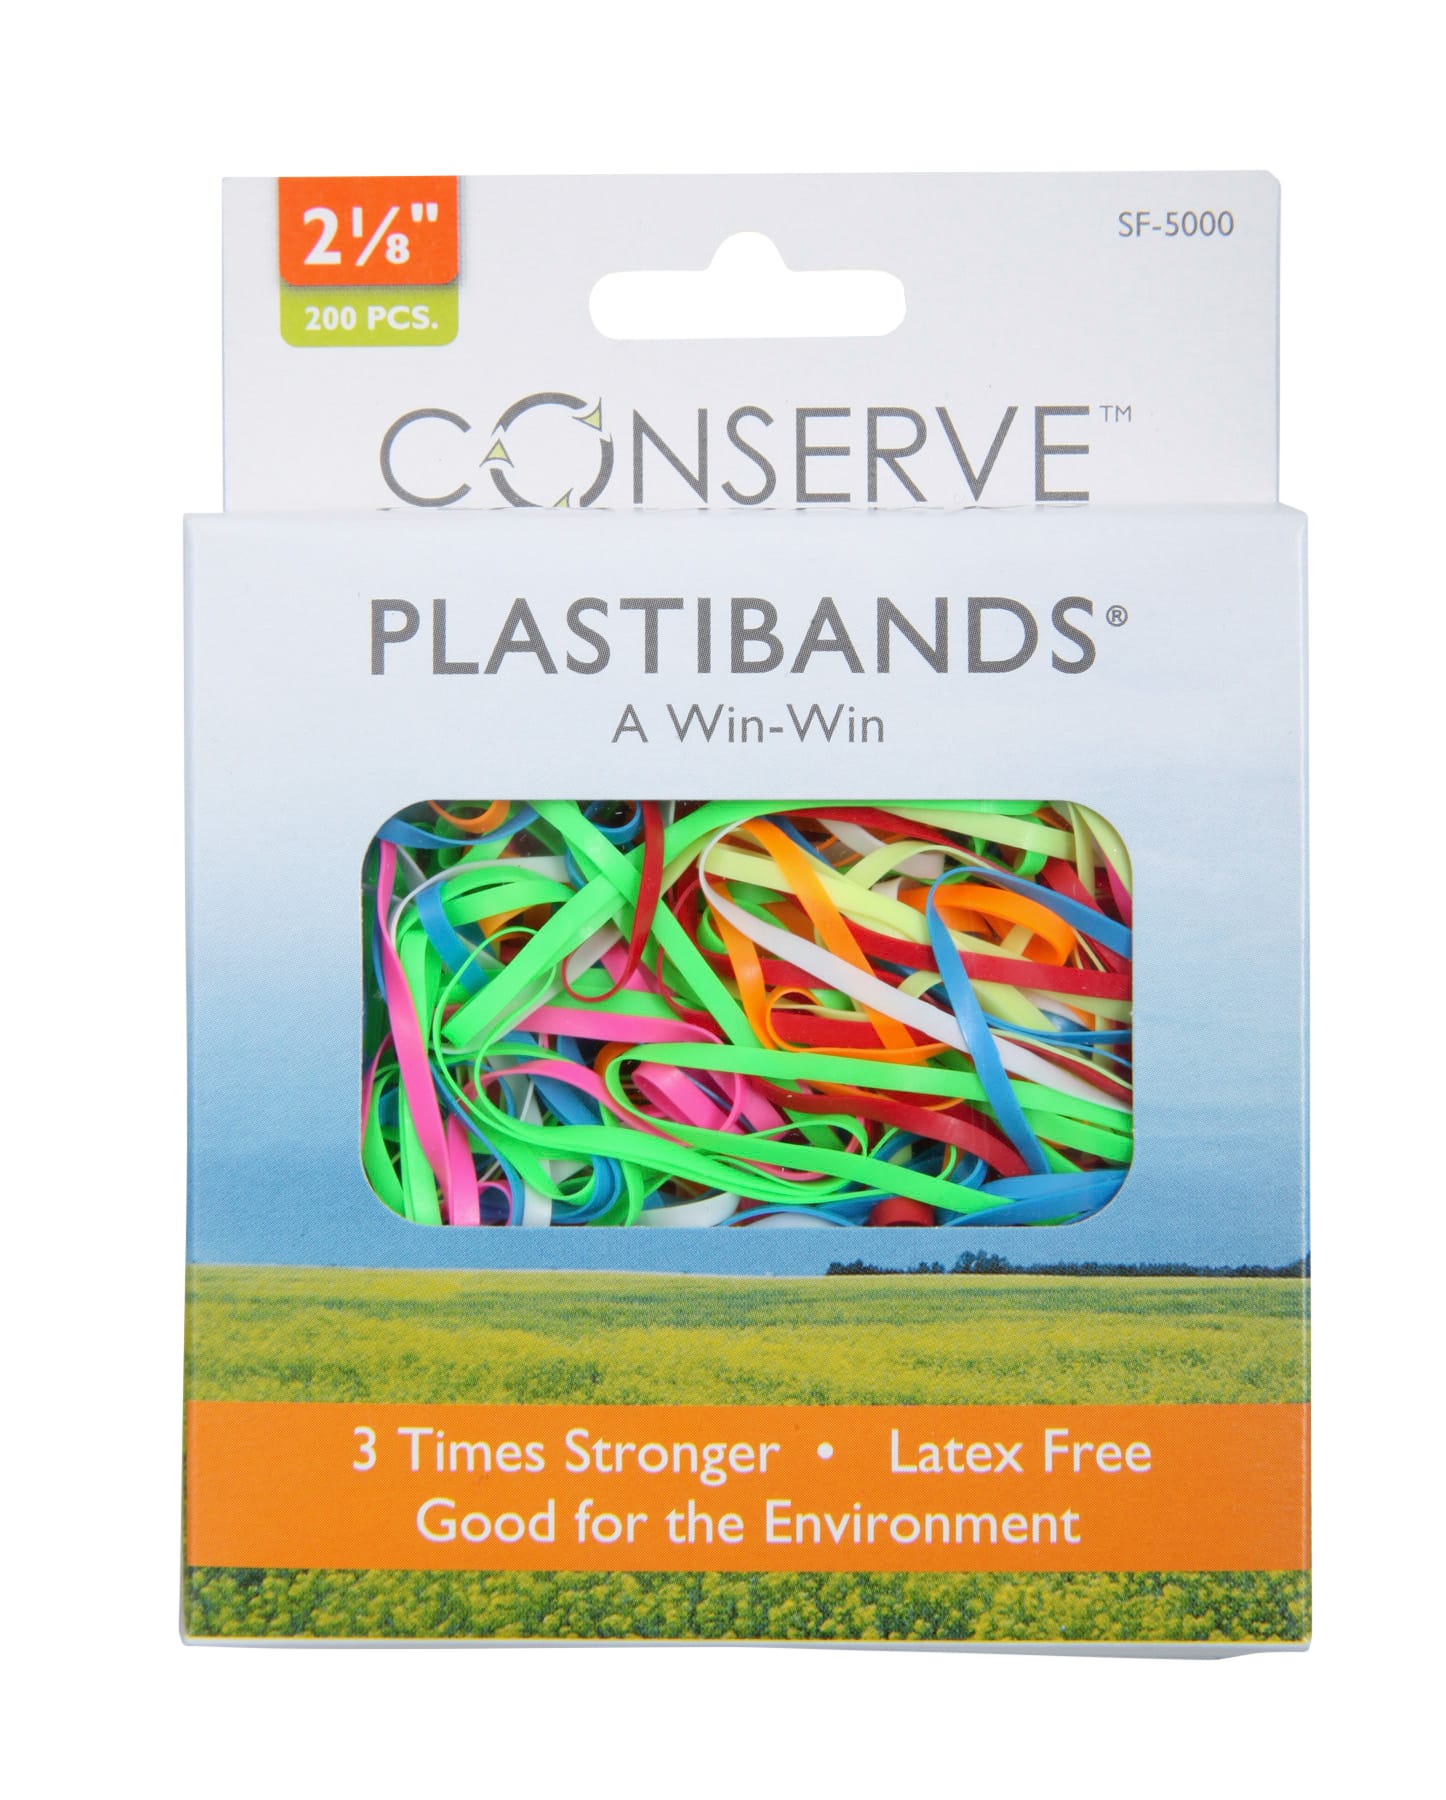 CONSERVE PlastiBands 2 1/8" 200 Pack ASSORTED Colors (SF-5000)